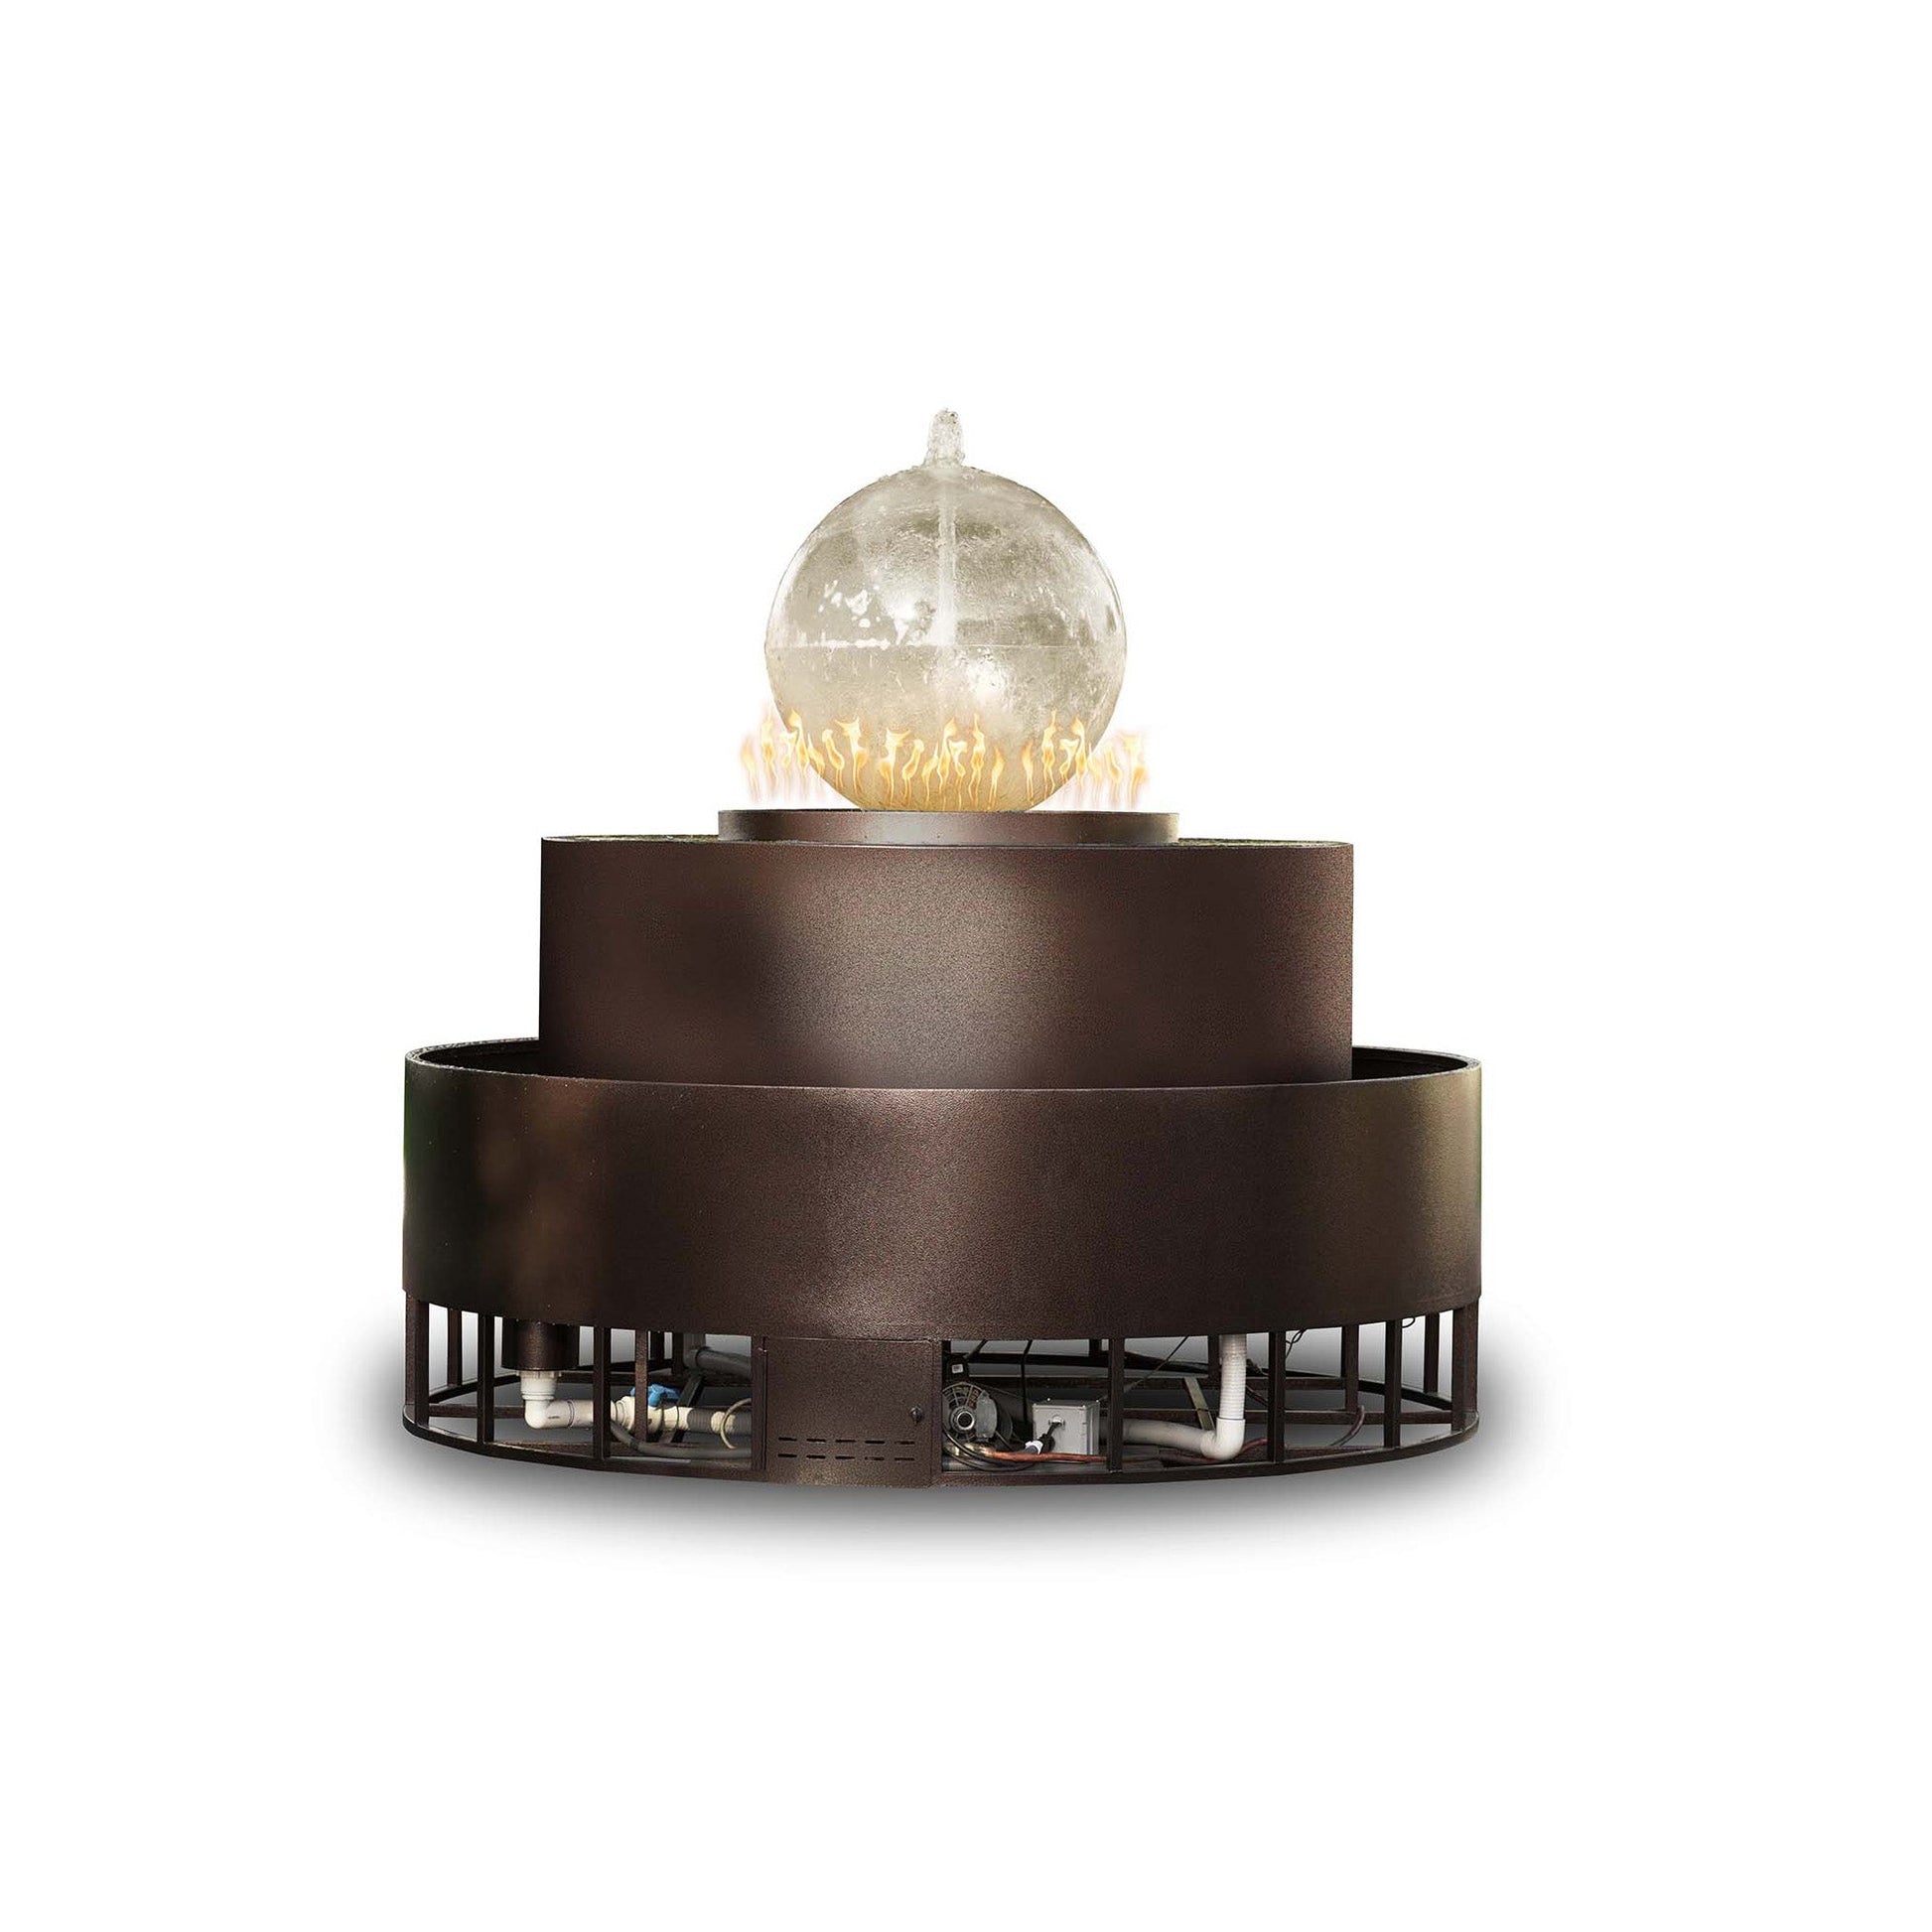 The Outdoor Plus Round Atlas 89" Java Powder Coated Natural Gas Fire & Water Fountain with 12V Electronic Ignition